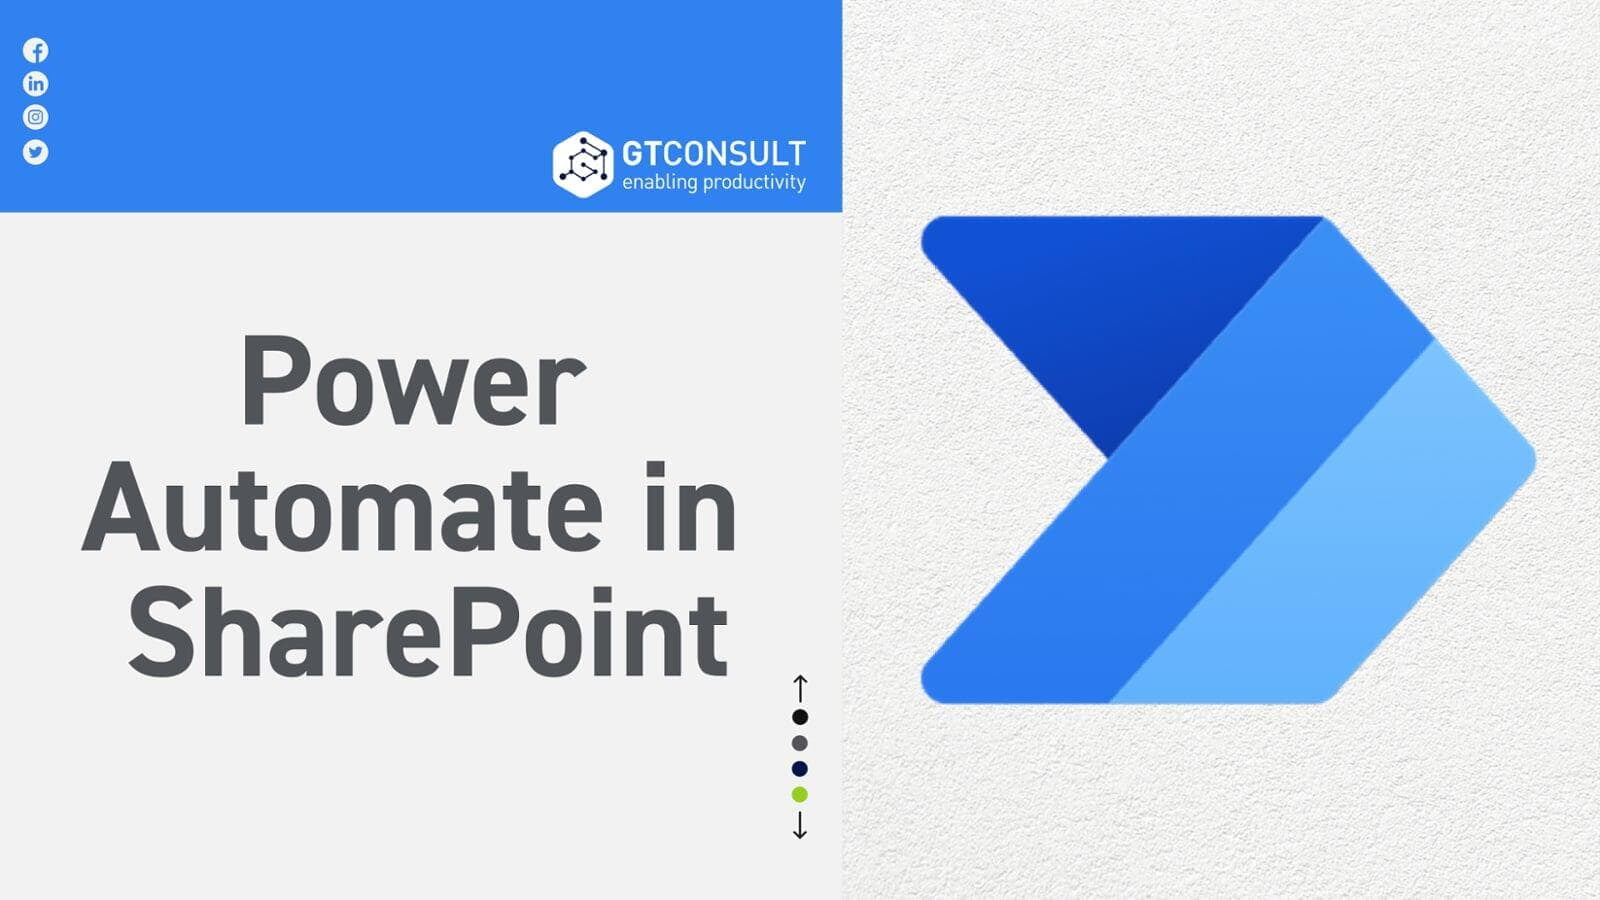 Power Automate in SharePoint